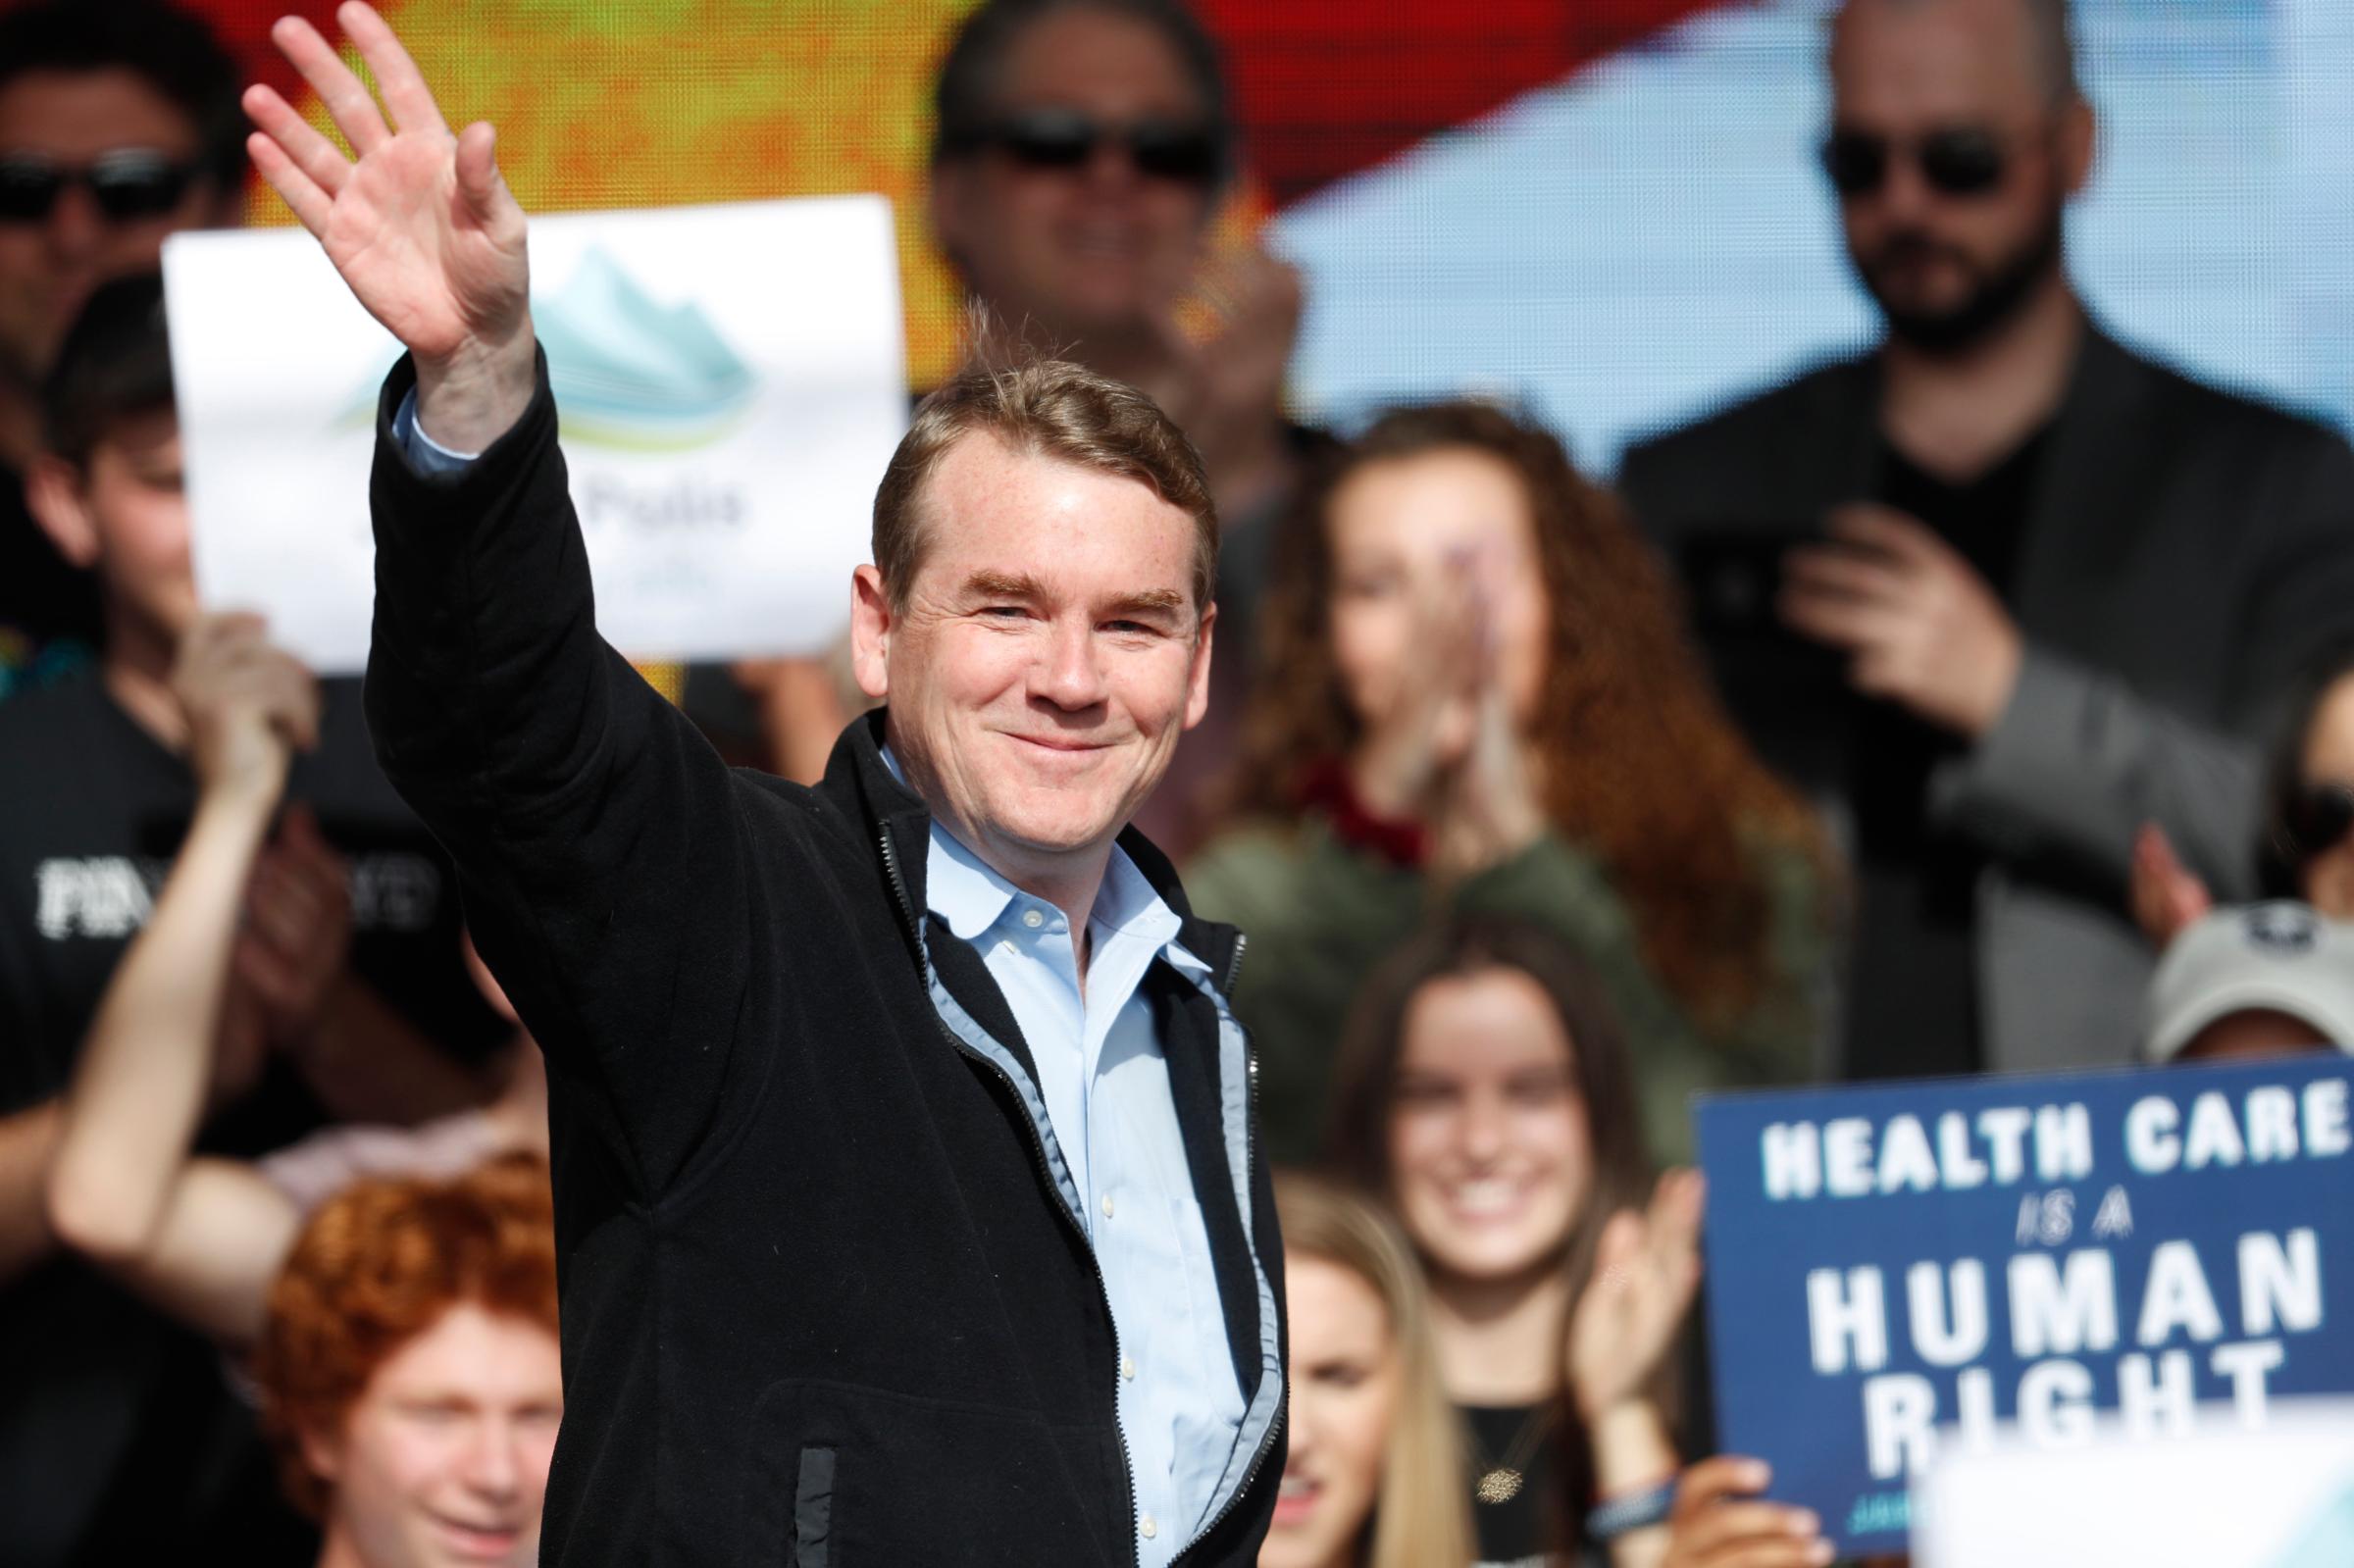 U.S. Senator Michael Bennet of Colorado has joined the pack Democratic presidential hopefuls by announcing his 2020 presidential campaign.